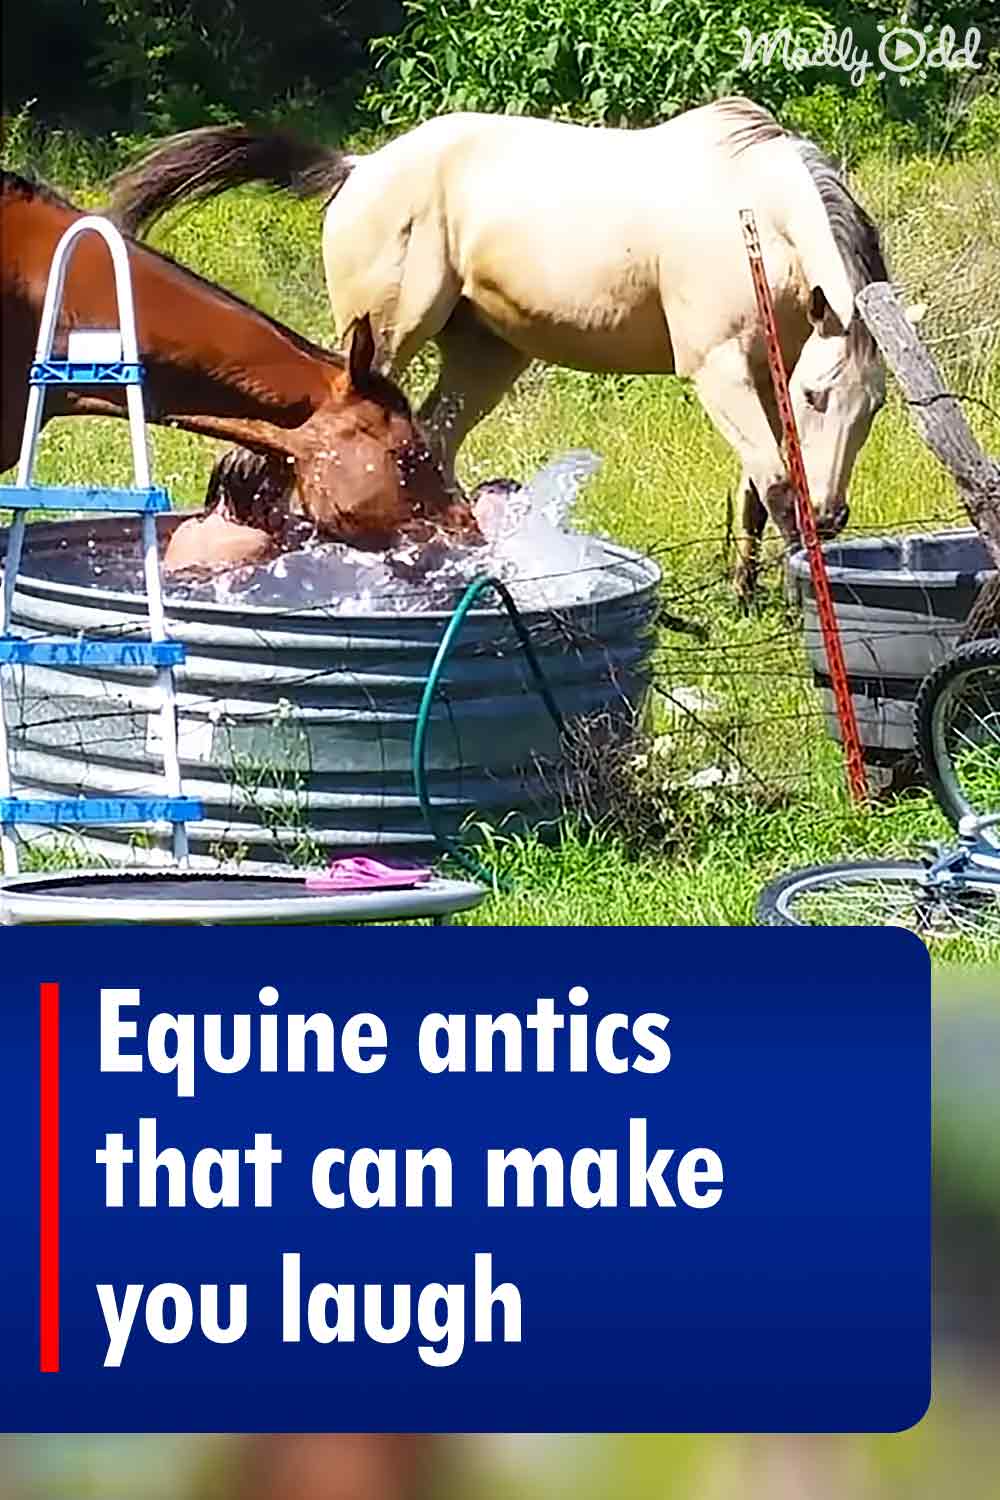 Equine antics that can make you laugh